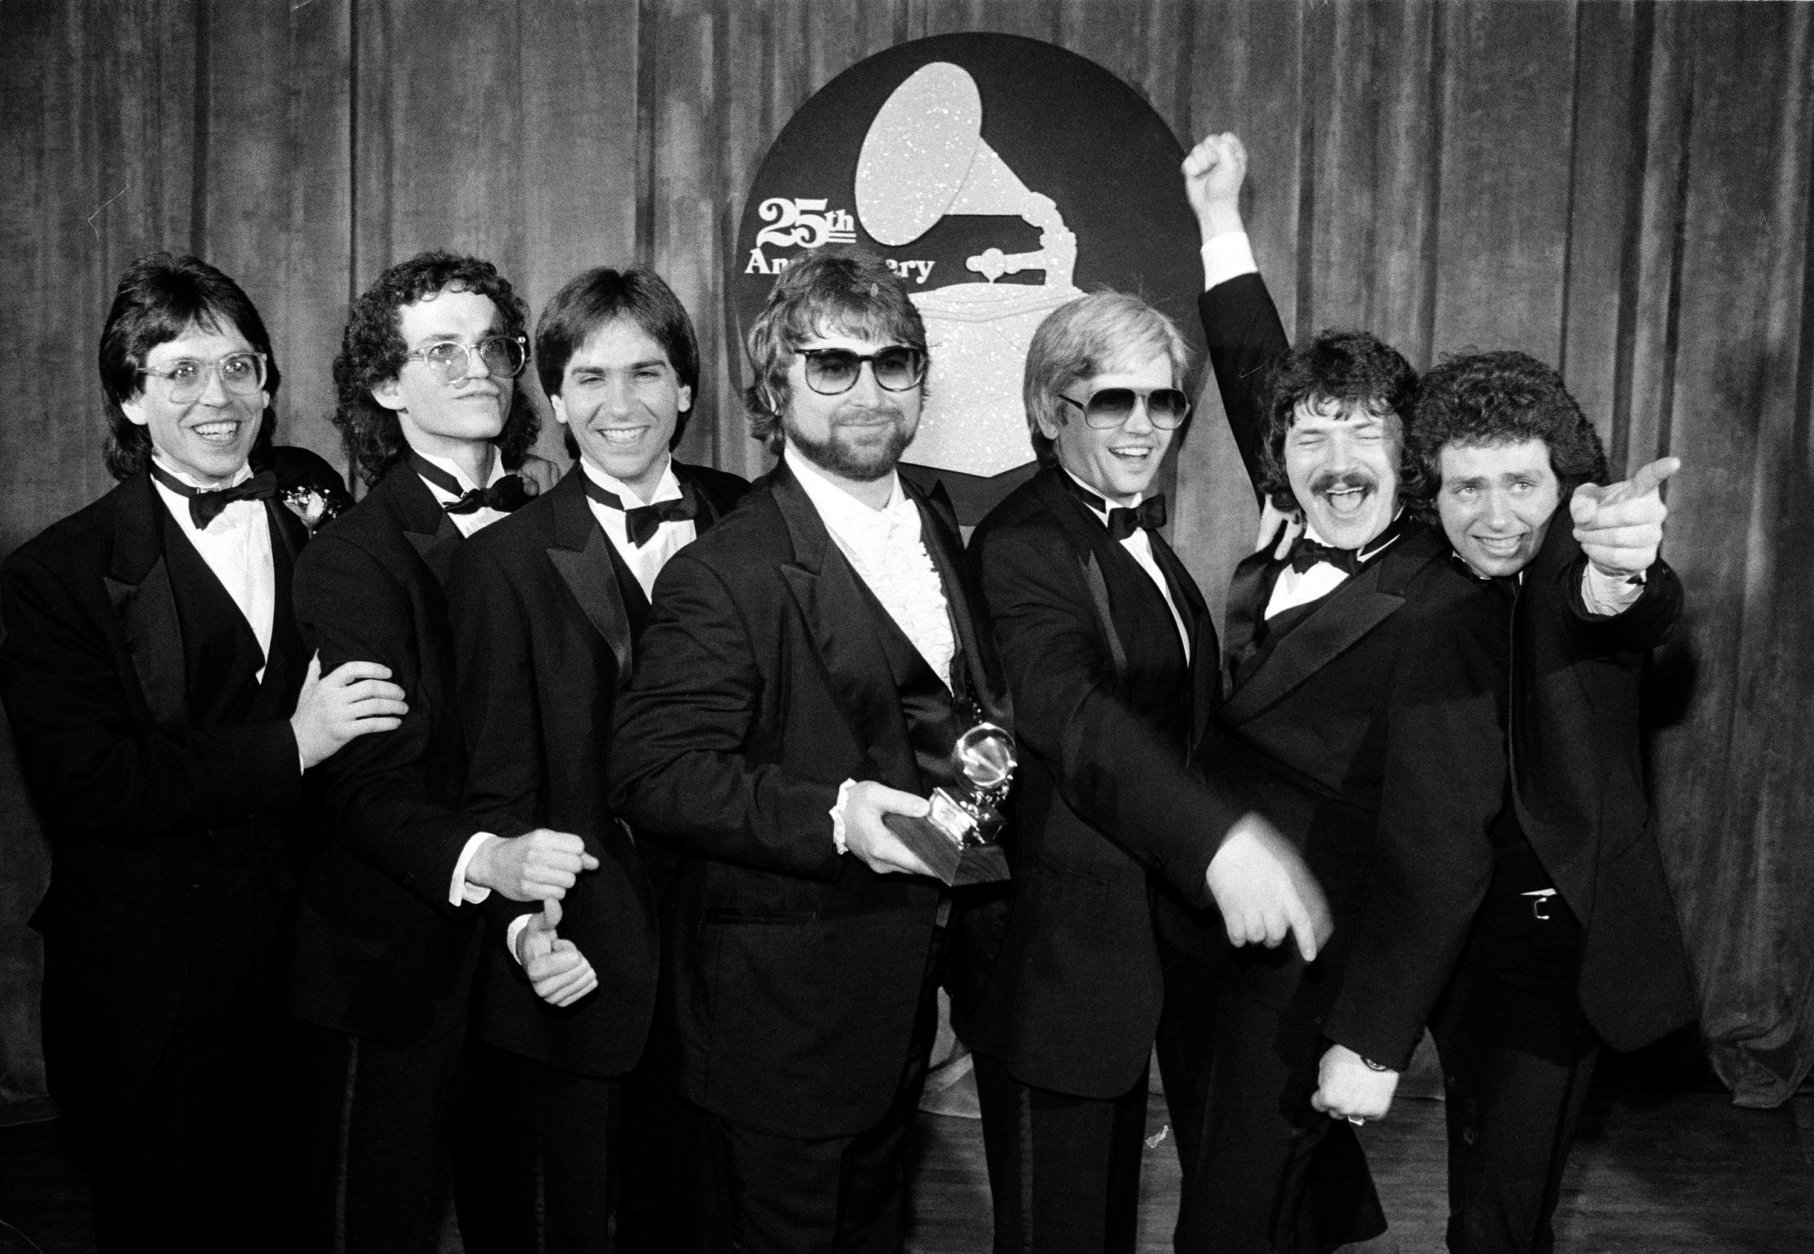 Band members of Toto pose after winning six Grammys during the 25th Annual Grammy Awards presentation in Los Angeles, Ca., Feb. 23, 1983.  Among the awards are record of the year for "Rosanna," album of the year for "Toto IV," and best instumental arrangement accompanying vocals for "Rosana."  From left are, Jeff Porcaro, Steve Porcaro, Michael Porcaro, Dave Paich, Dave Herngate, Bobby Kimball and Steve Lukather.  (AP Photo)